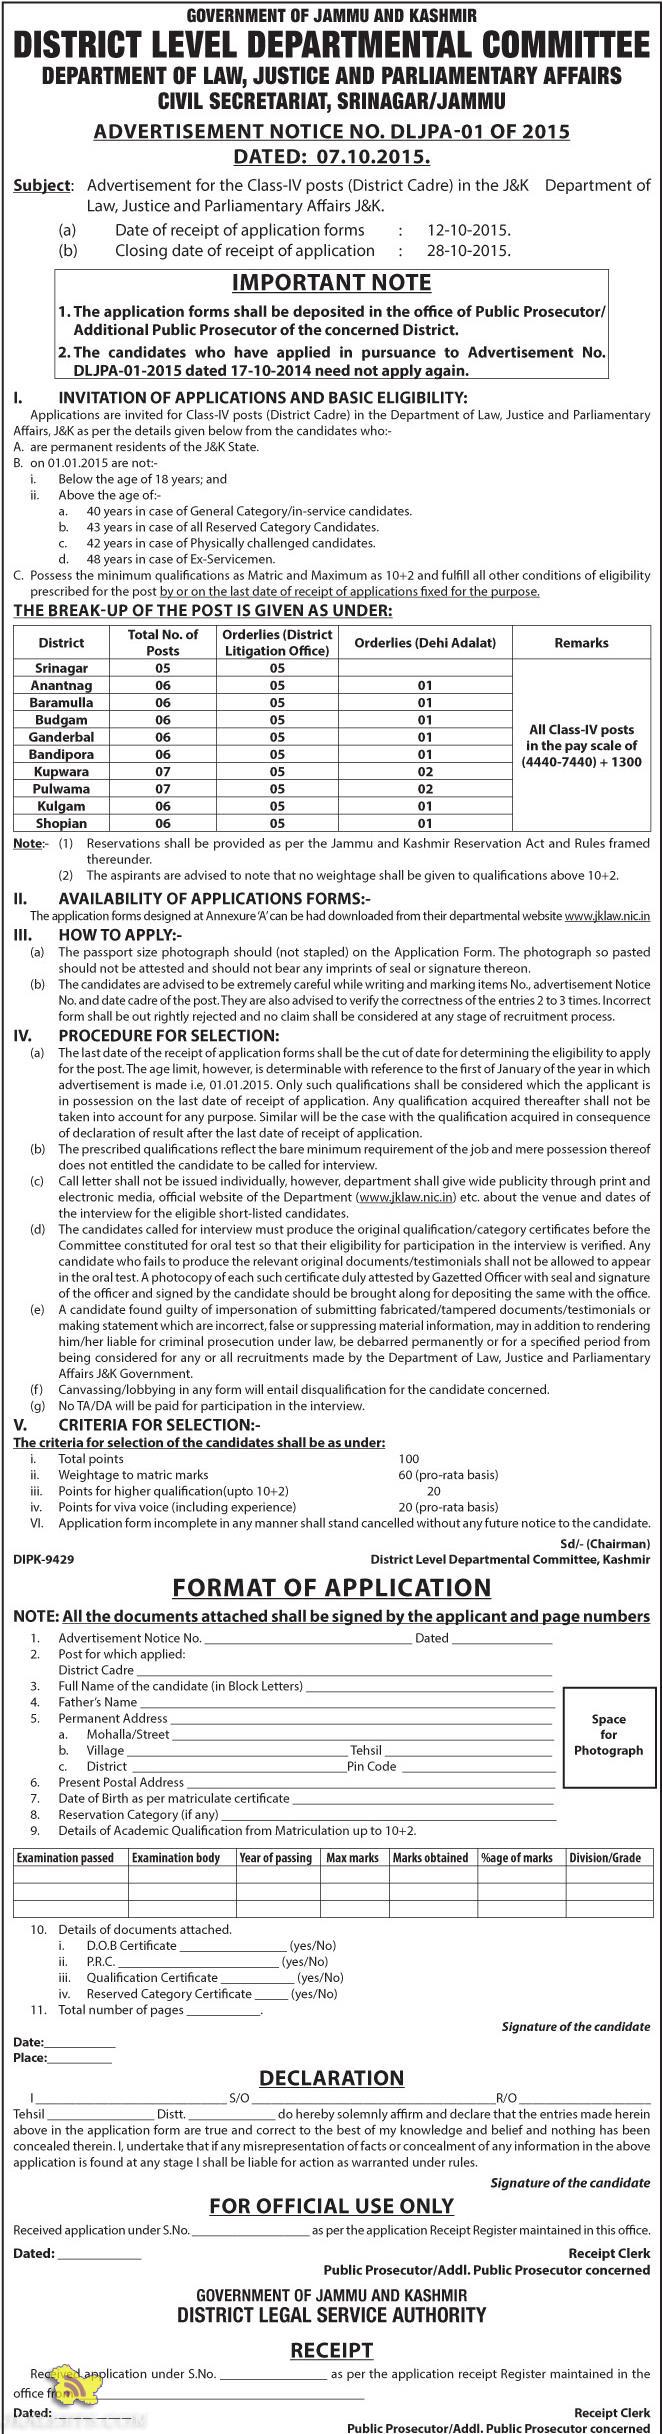 Class-IV Jobs (District Cadre) in J&K Department of Law, Justice and Parliamentary Affairs J&K